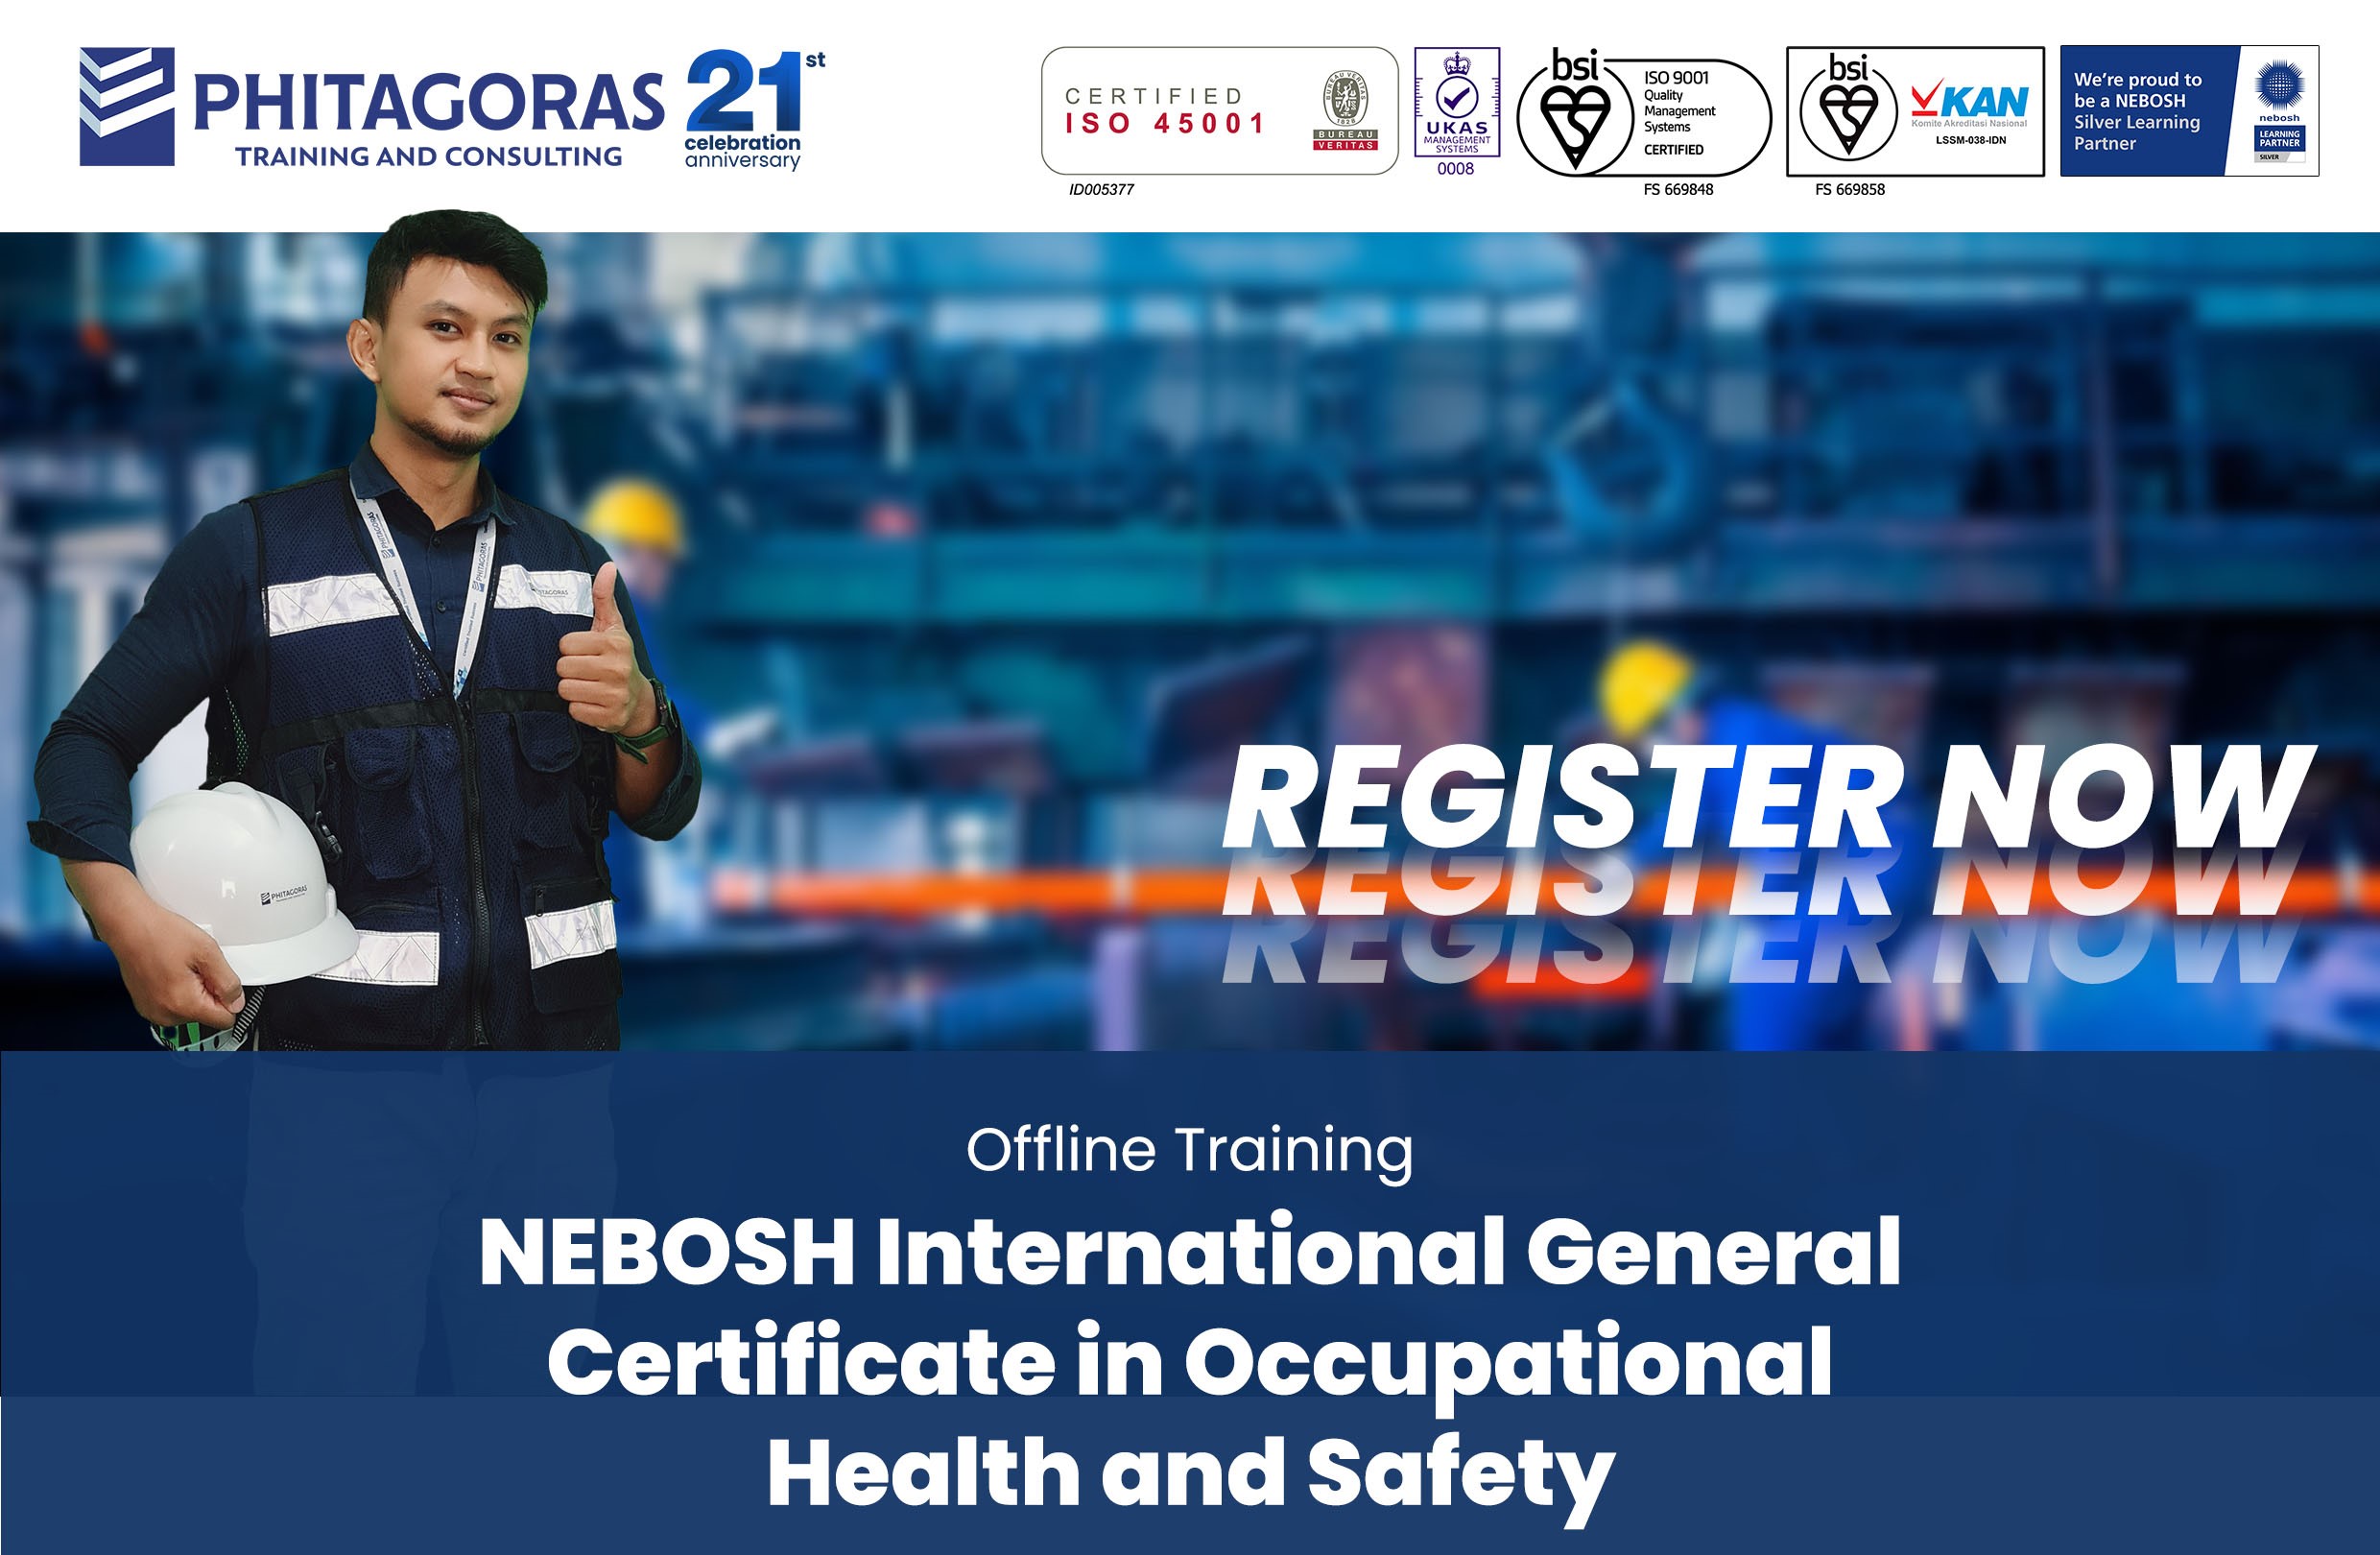 Training NEBOSH International General Certificate in Occupational Health and Safety